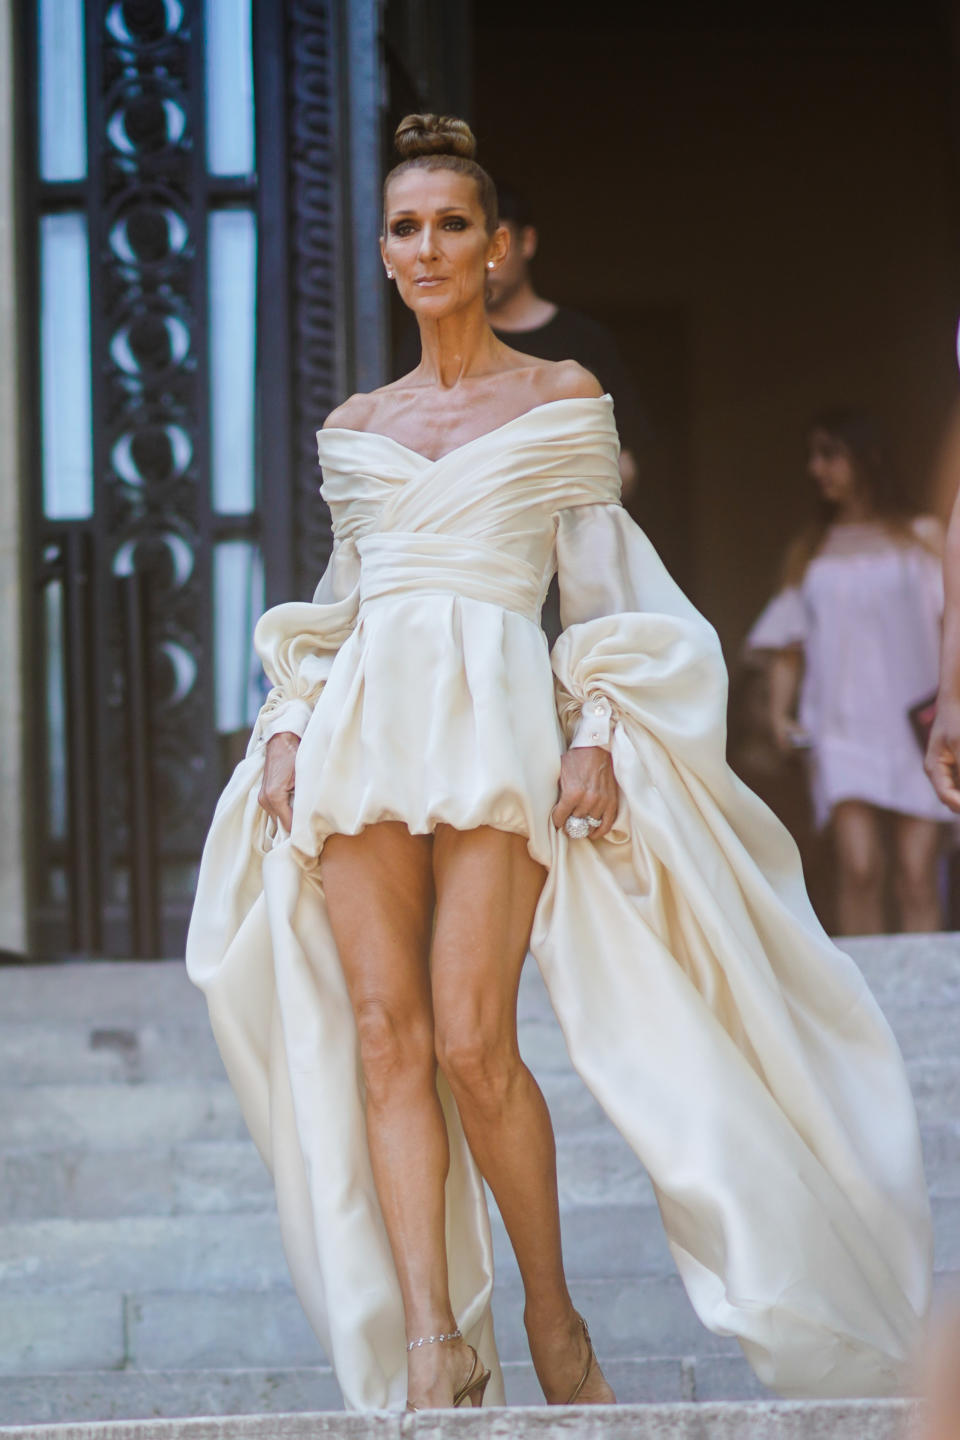 Dion stunned in an ivory-coloured Alexandre Vauthier mini dress during Paris Fashion Week on July 2, 2019. (Photo by Edward Berthelot/Getty Images)